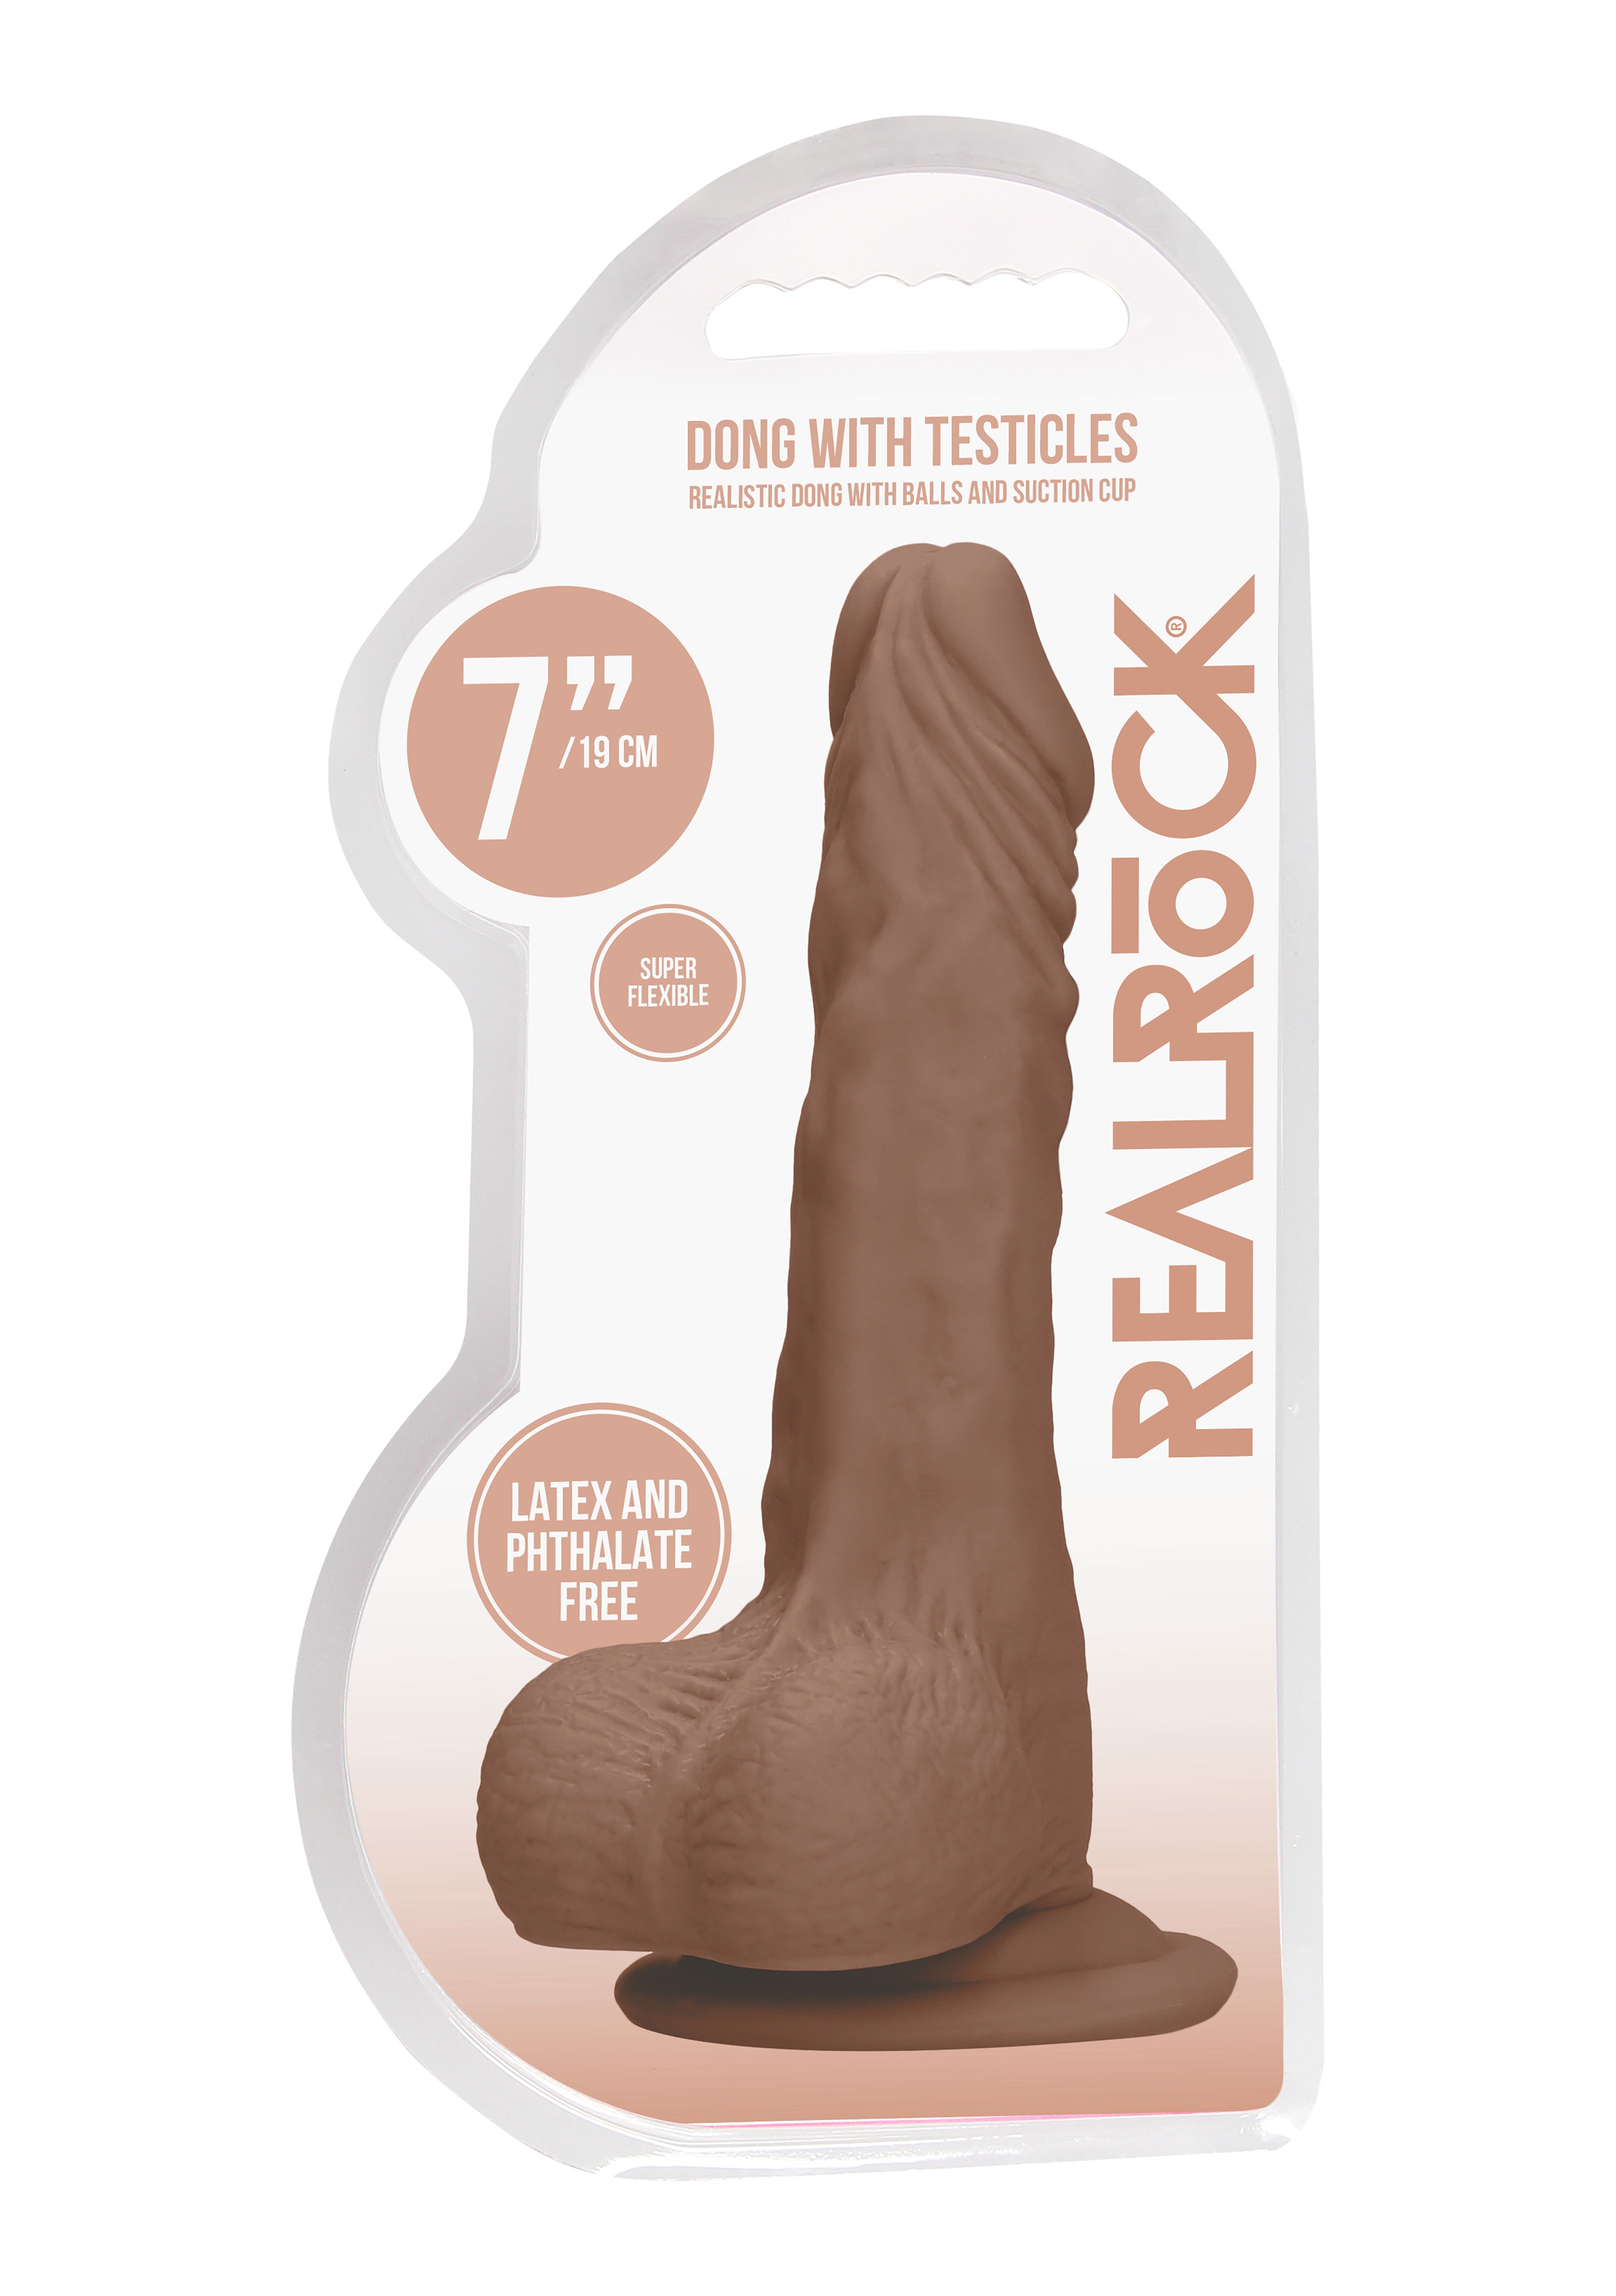 7 Inch Dong With Testicles - Tan